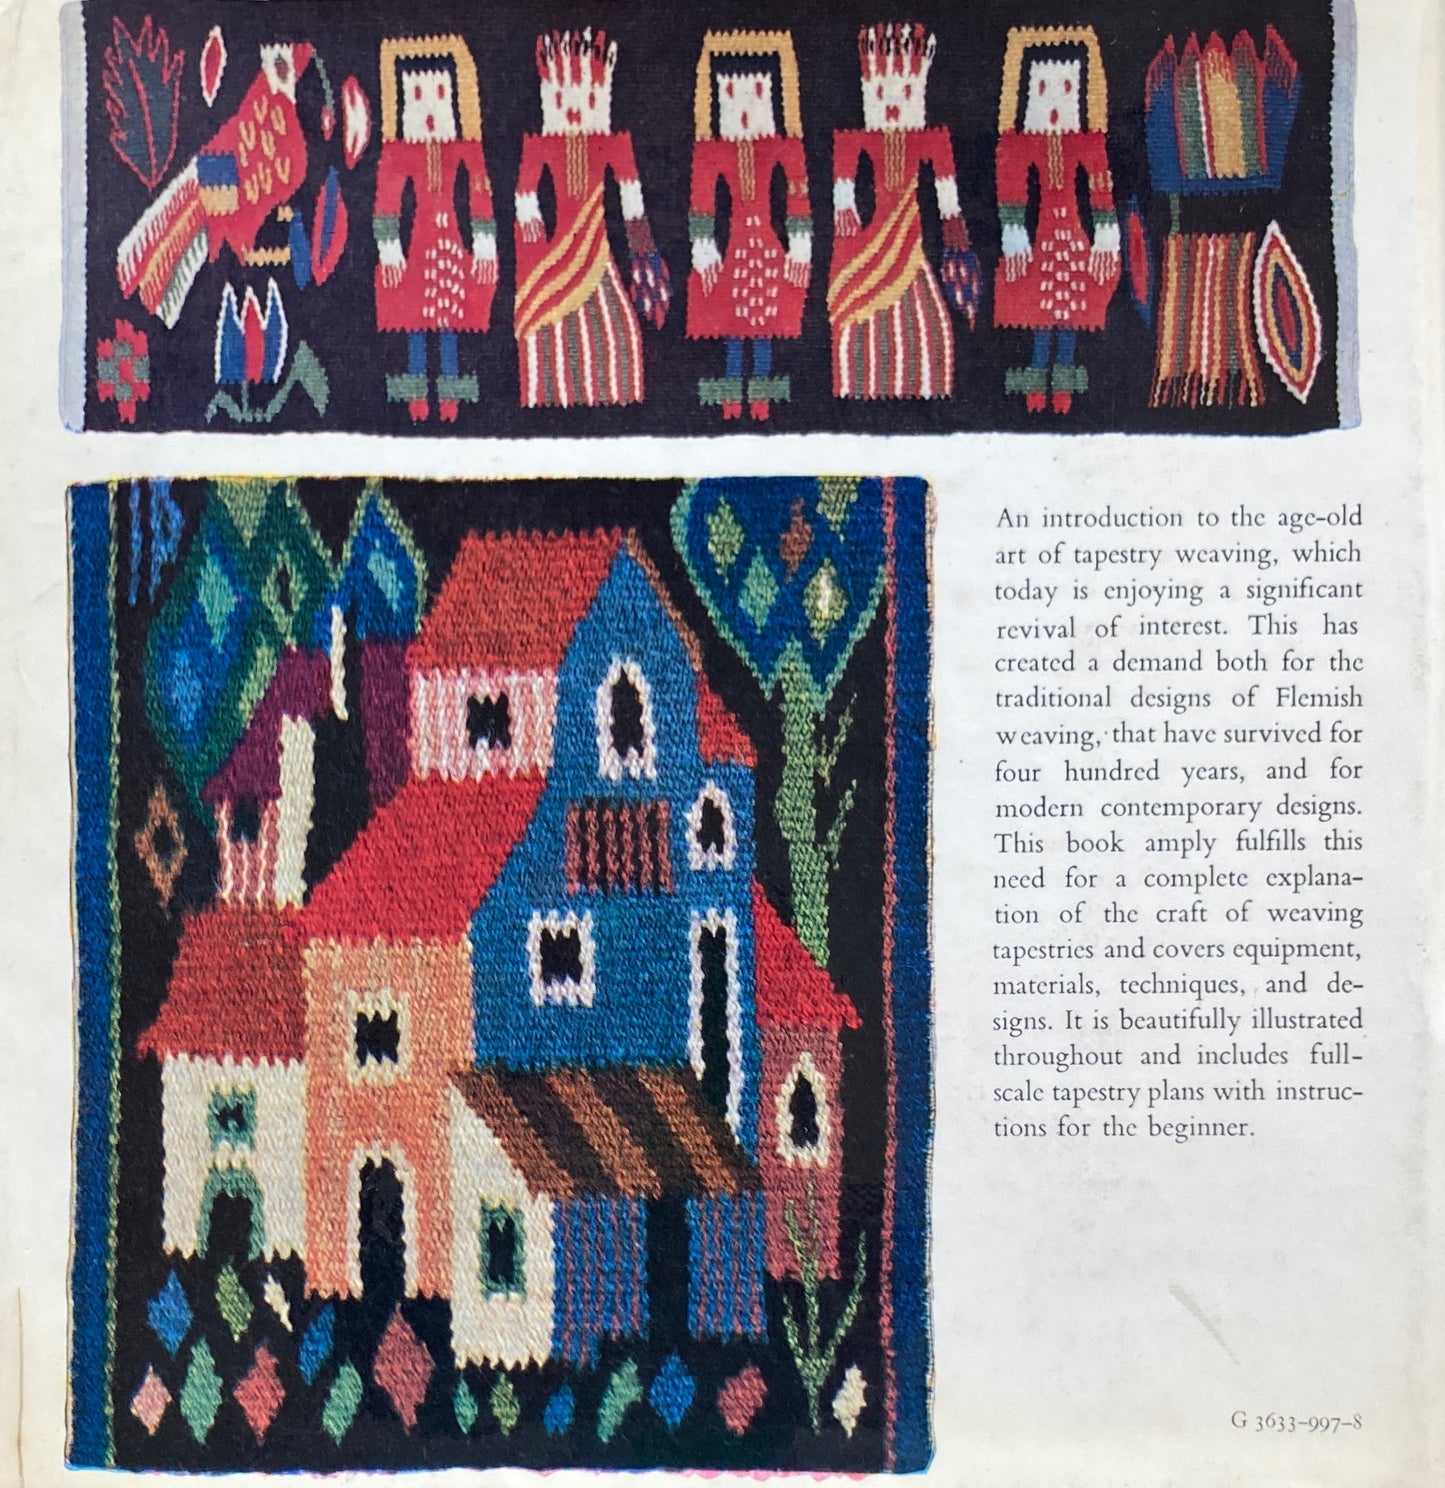 Flemish Weaving A Guide to Tapestry Technique Gertrud Ingers